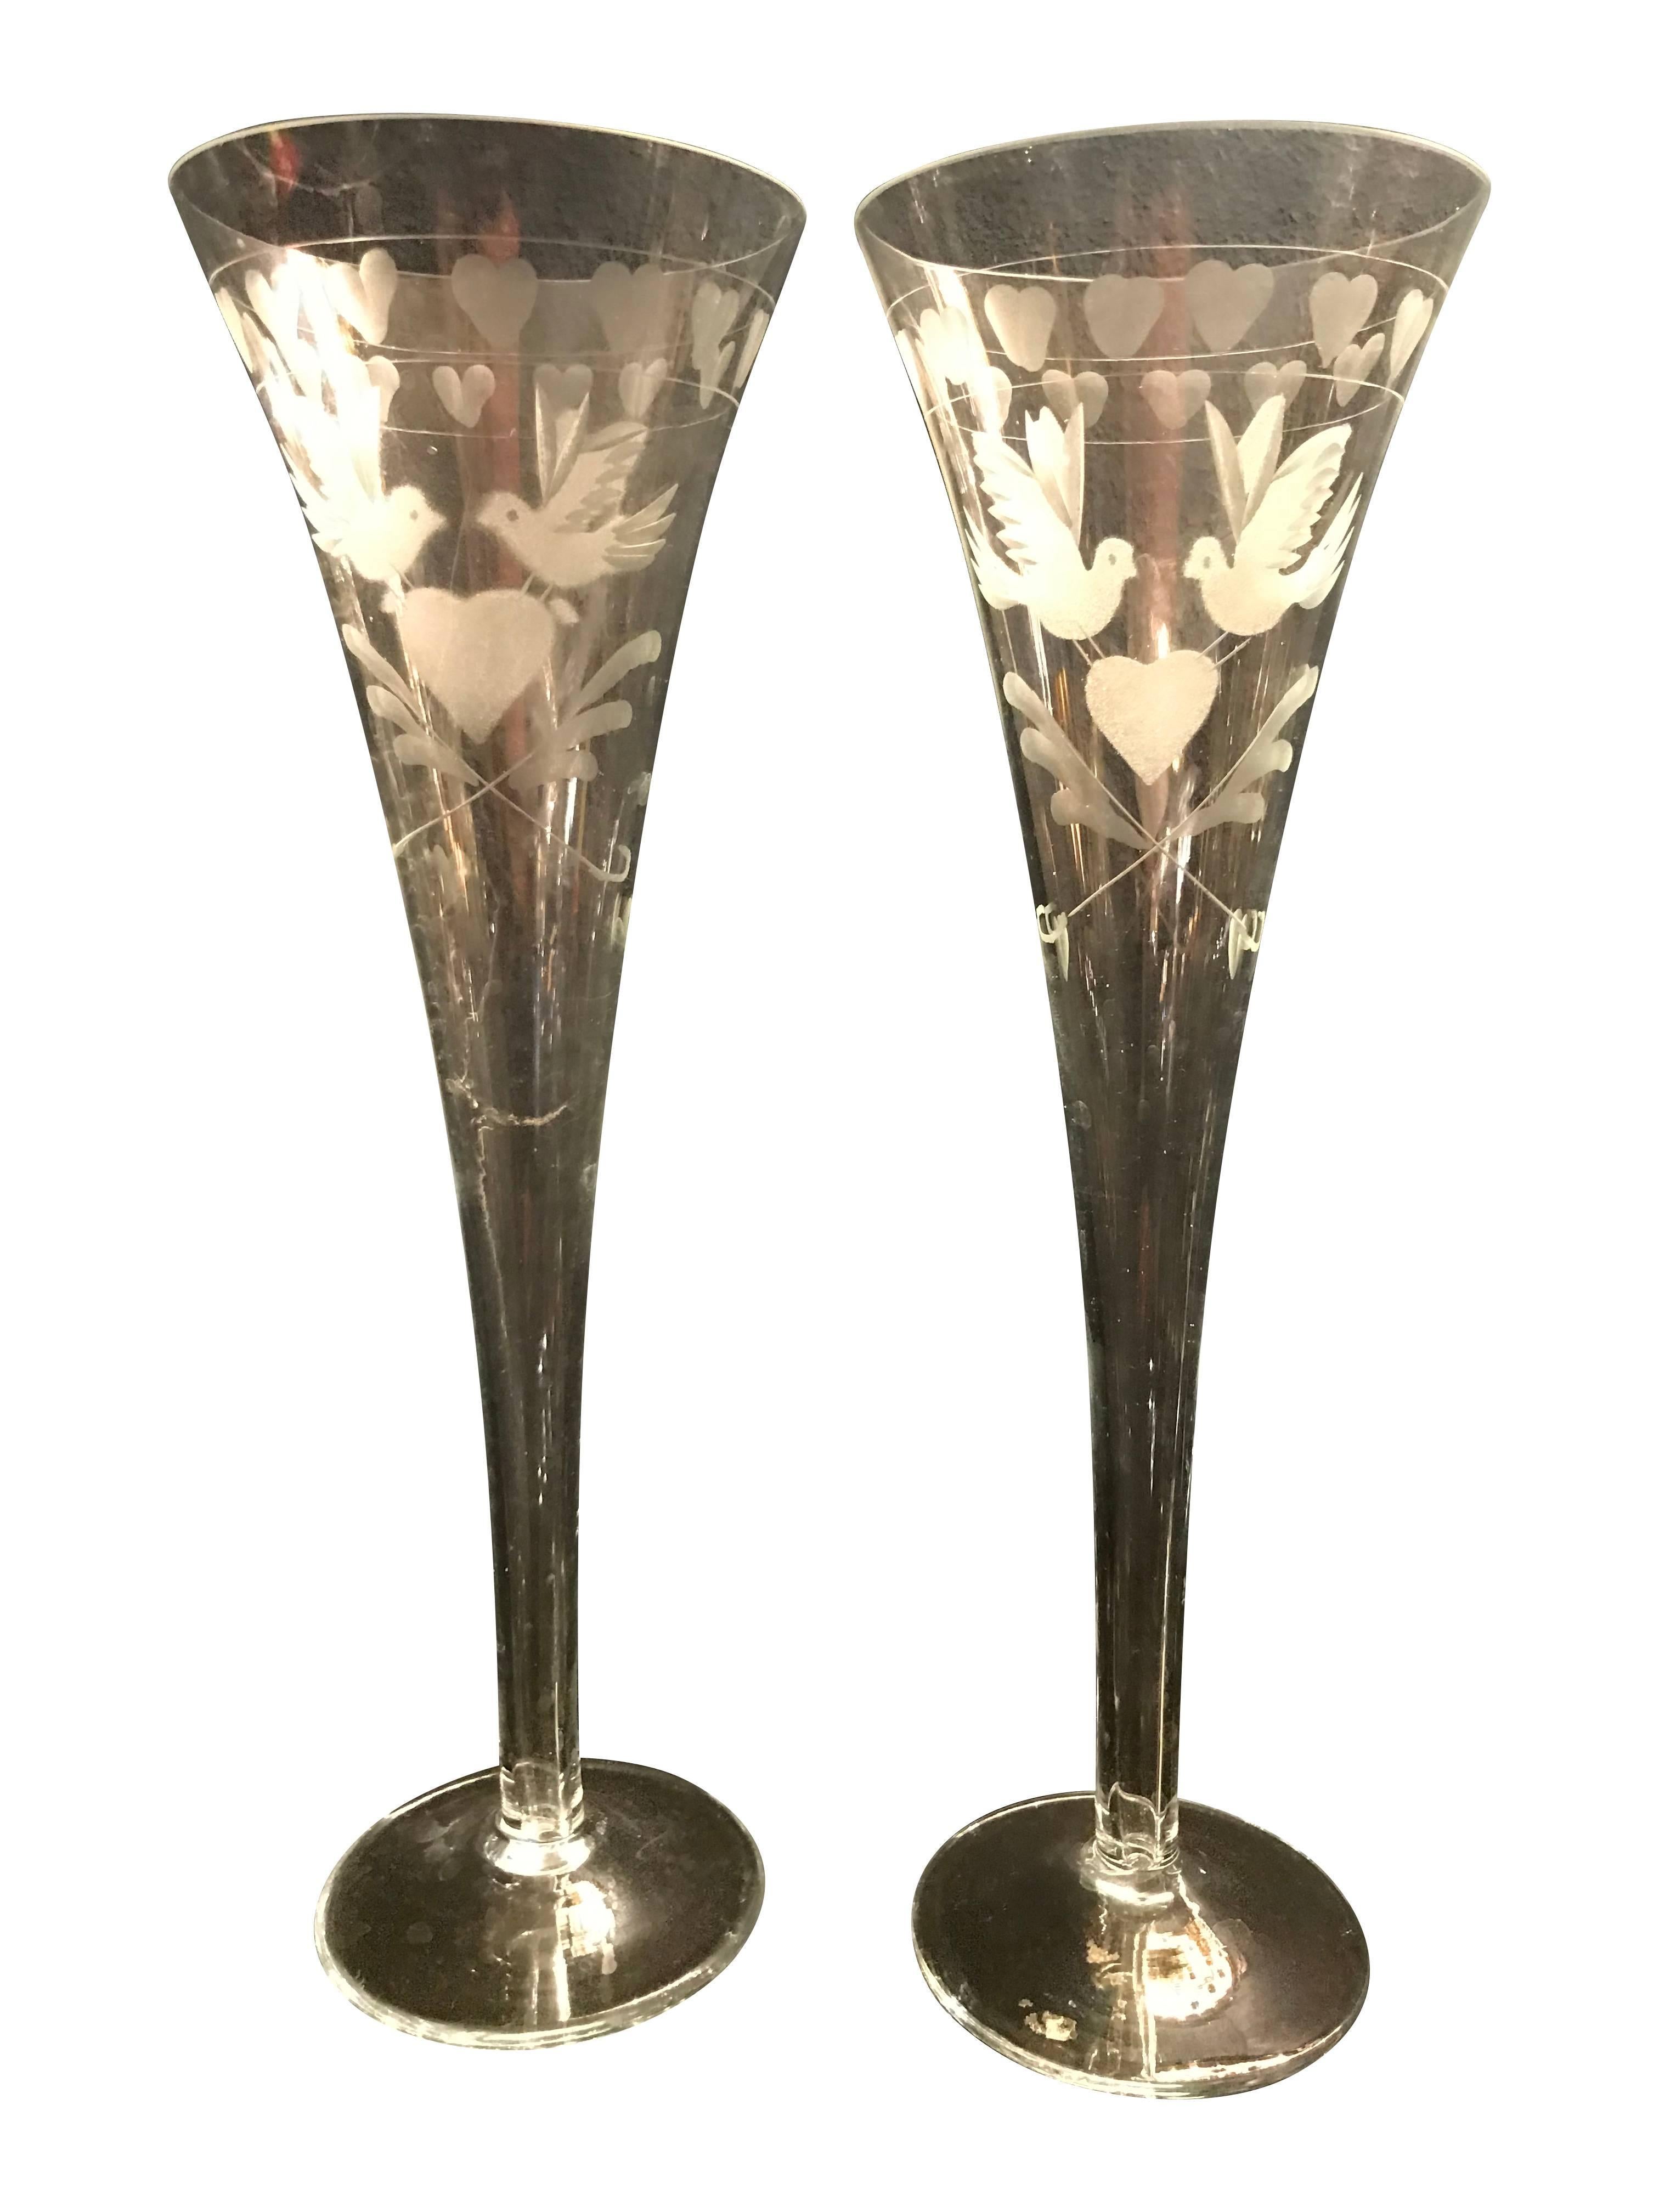 Beautiful, vintage, engraved French champagne flutes. Each engraved with two doves holding a love heart, also with love hearts around the rim. All in perfect condition and available individually, 11 available. Perfect for wedding, engagement, or